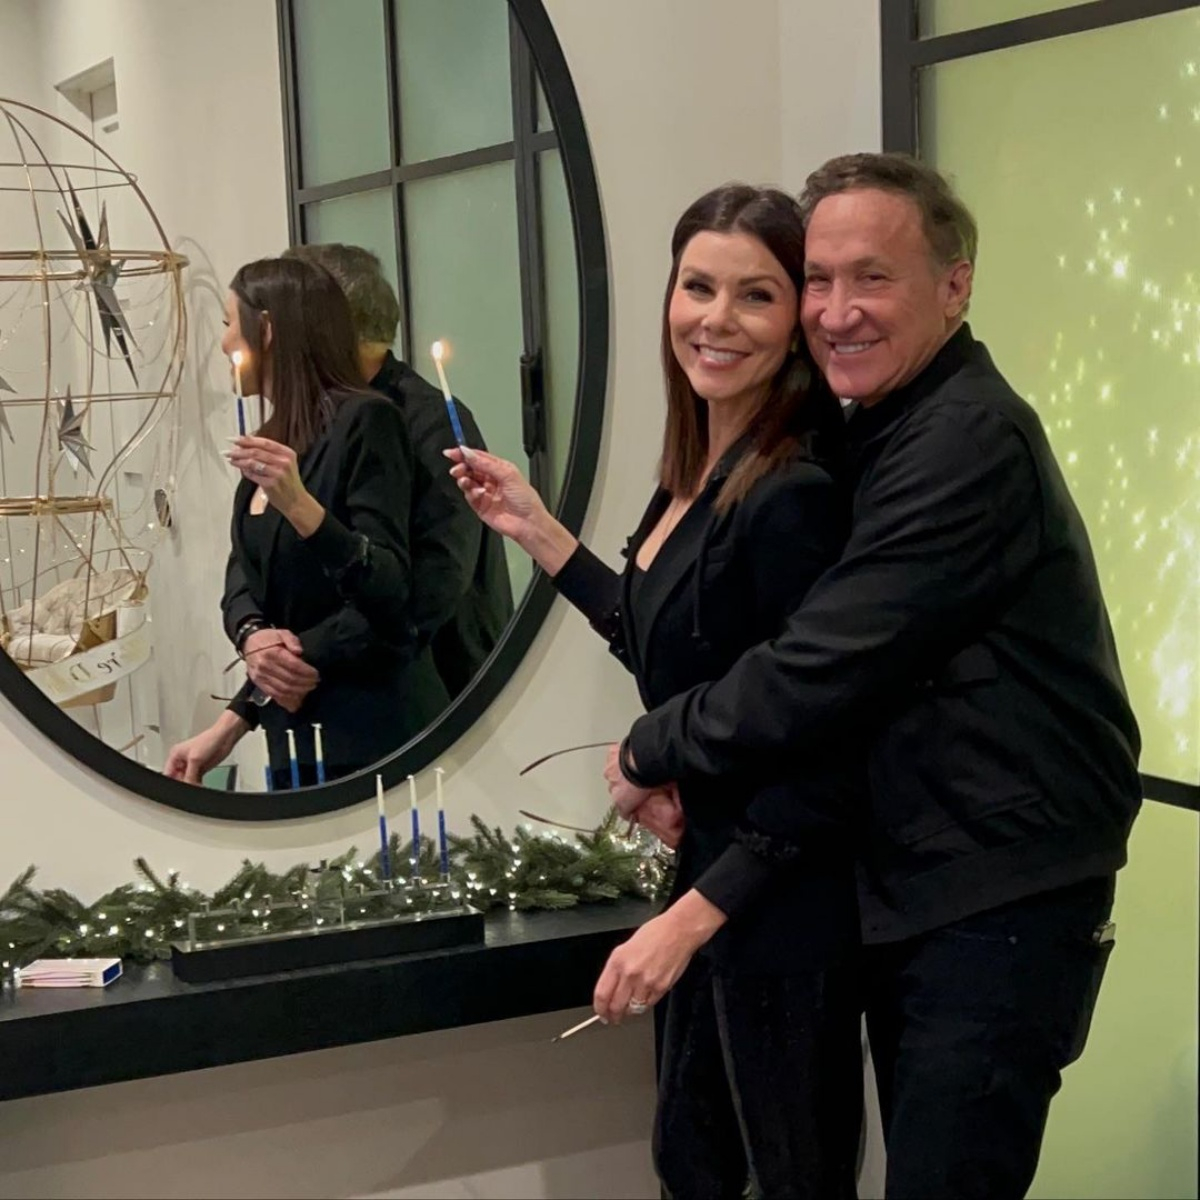 Heather Dubrow, Terry Dubrow, Holidays 2022 